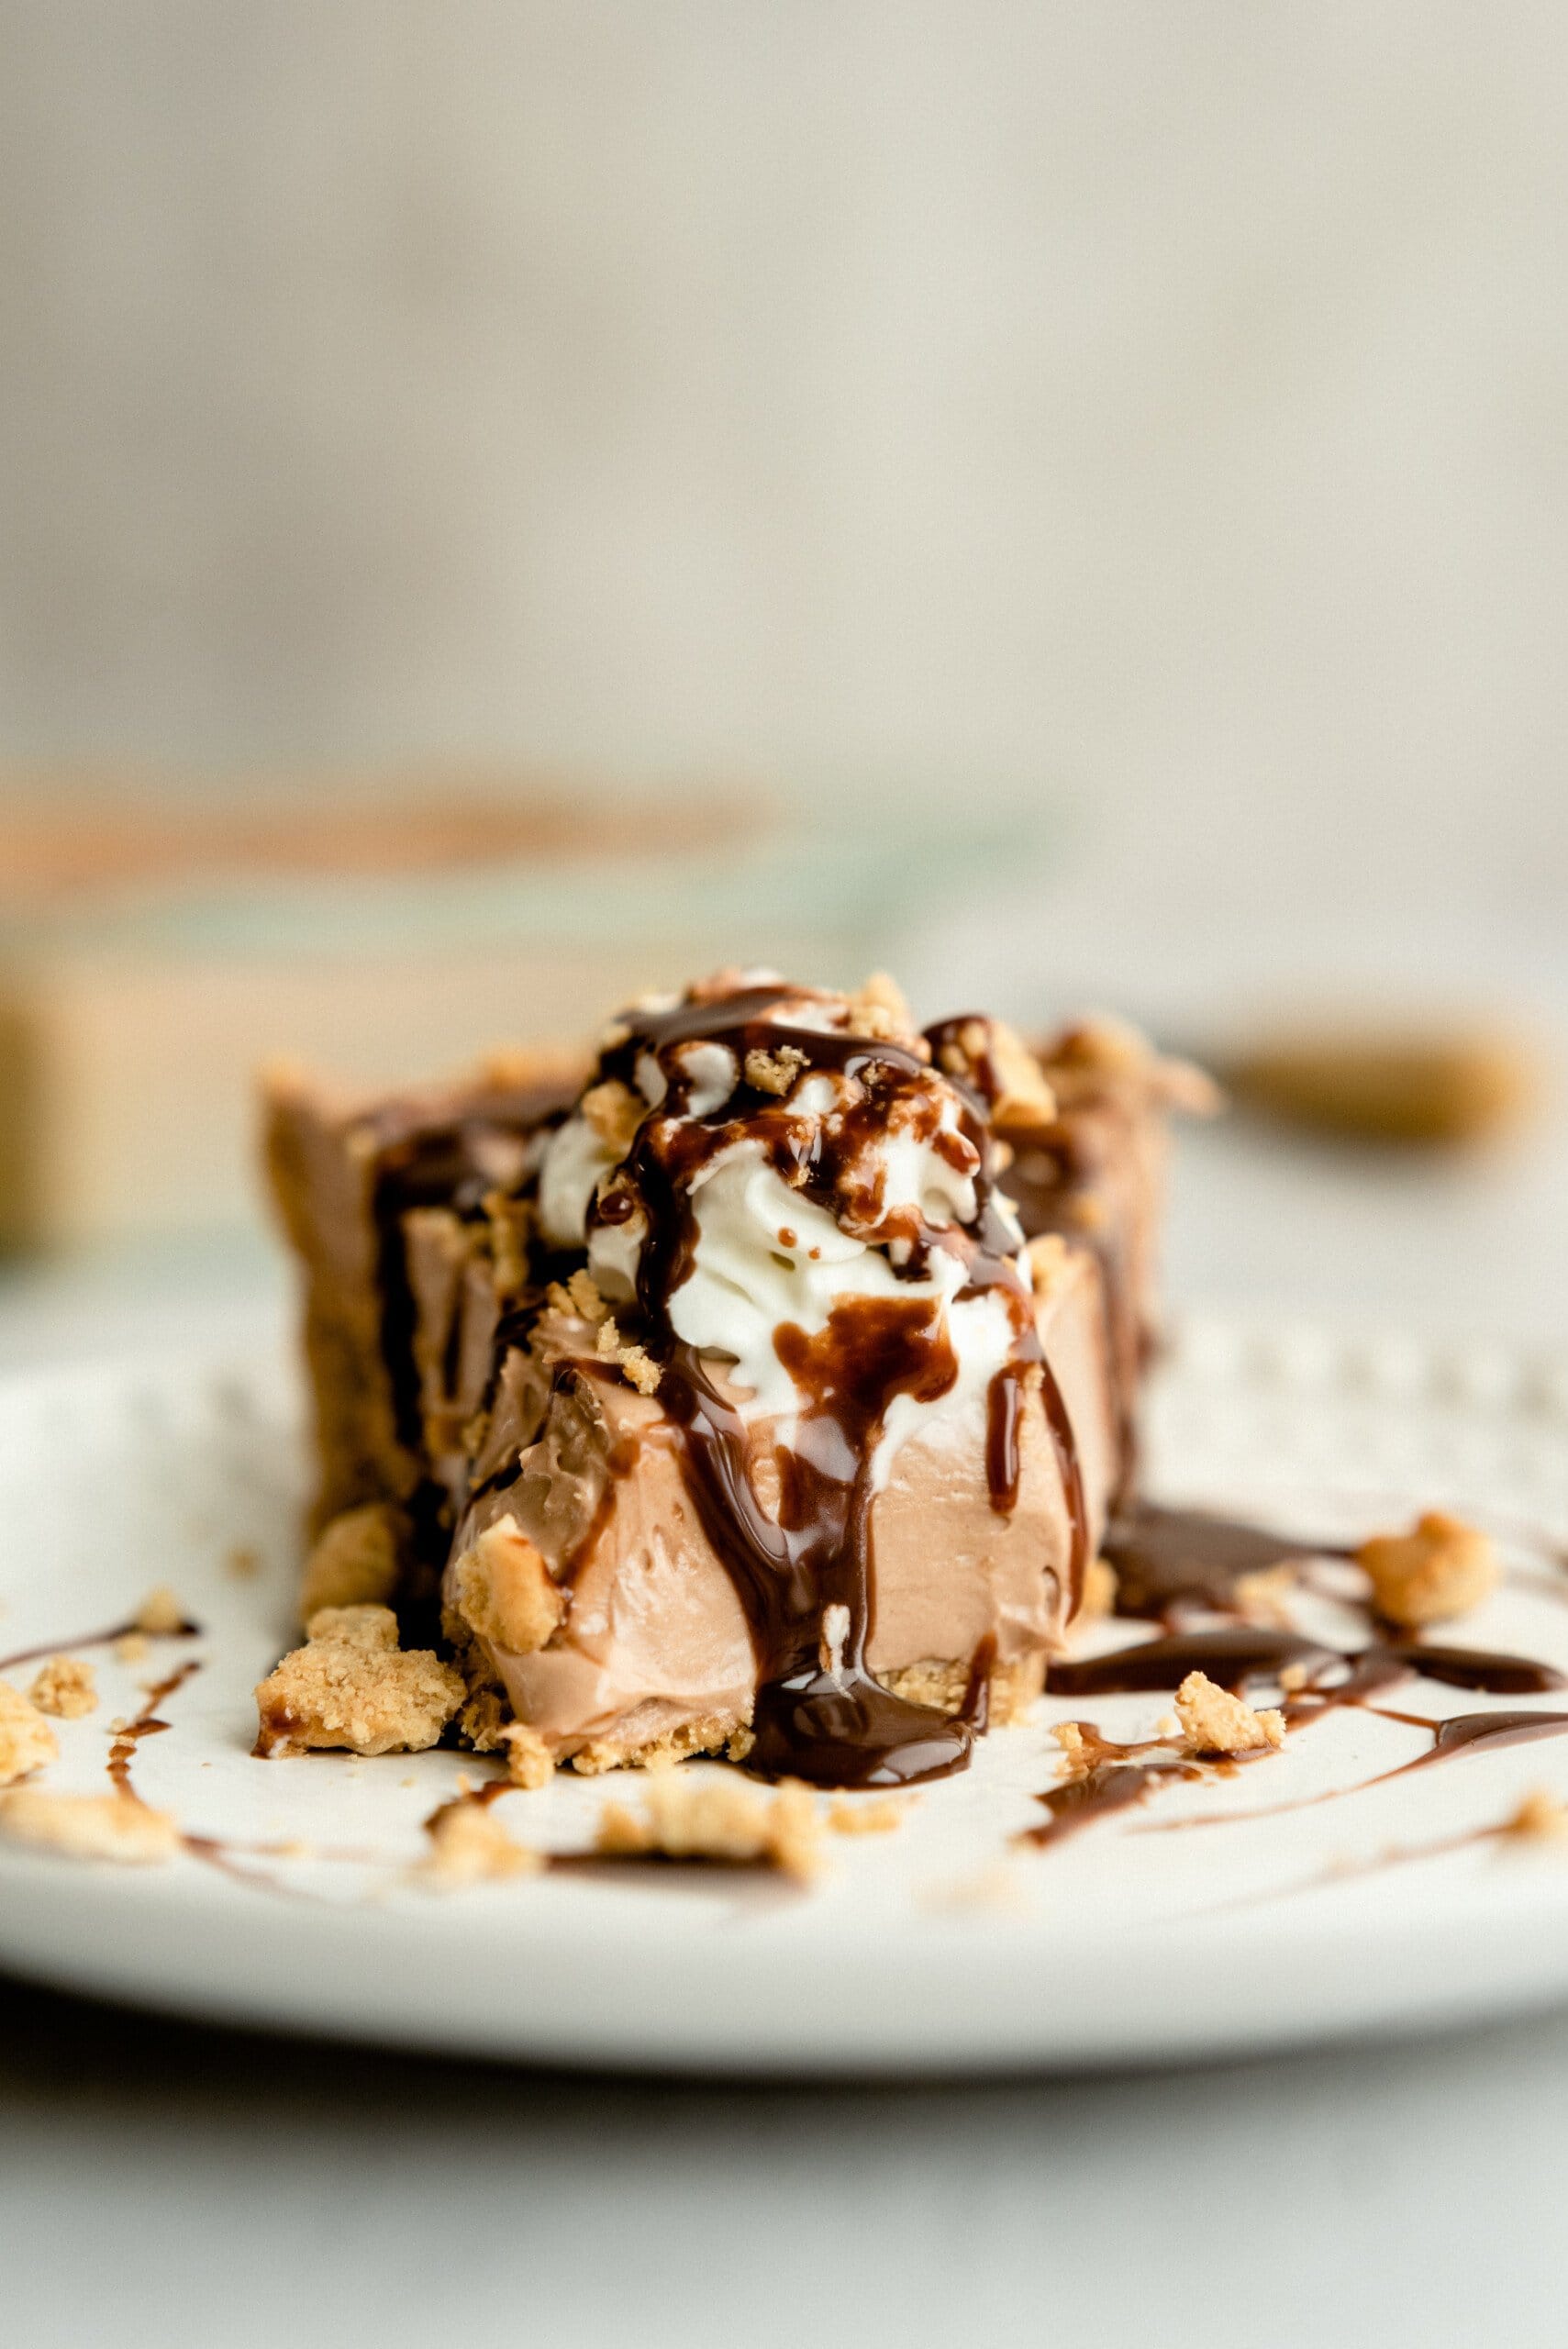 straight forward view of a slice of no bake nutella pie